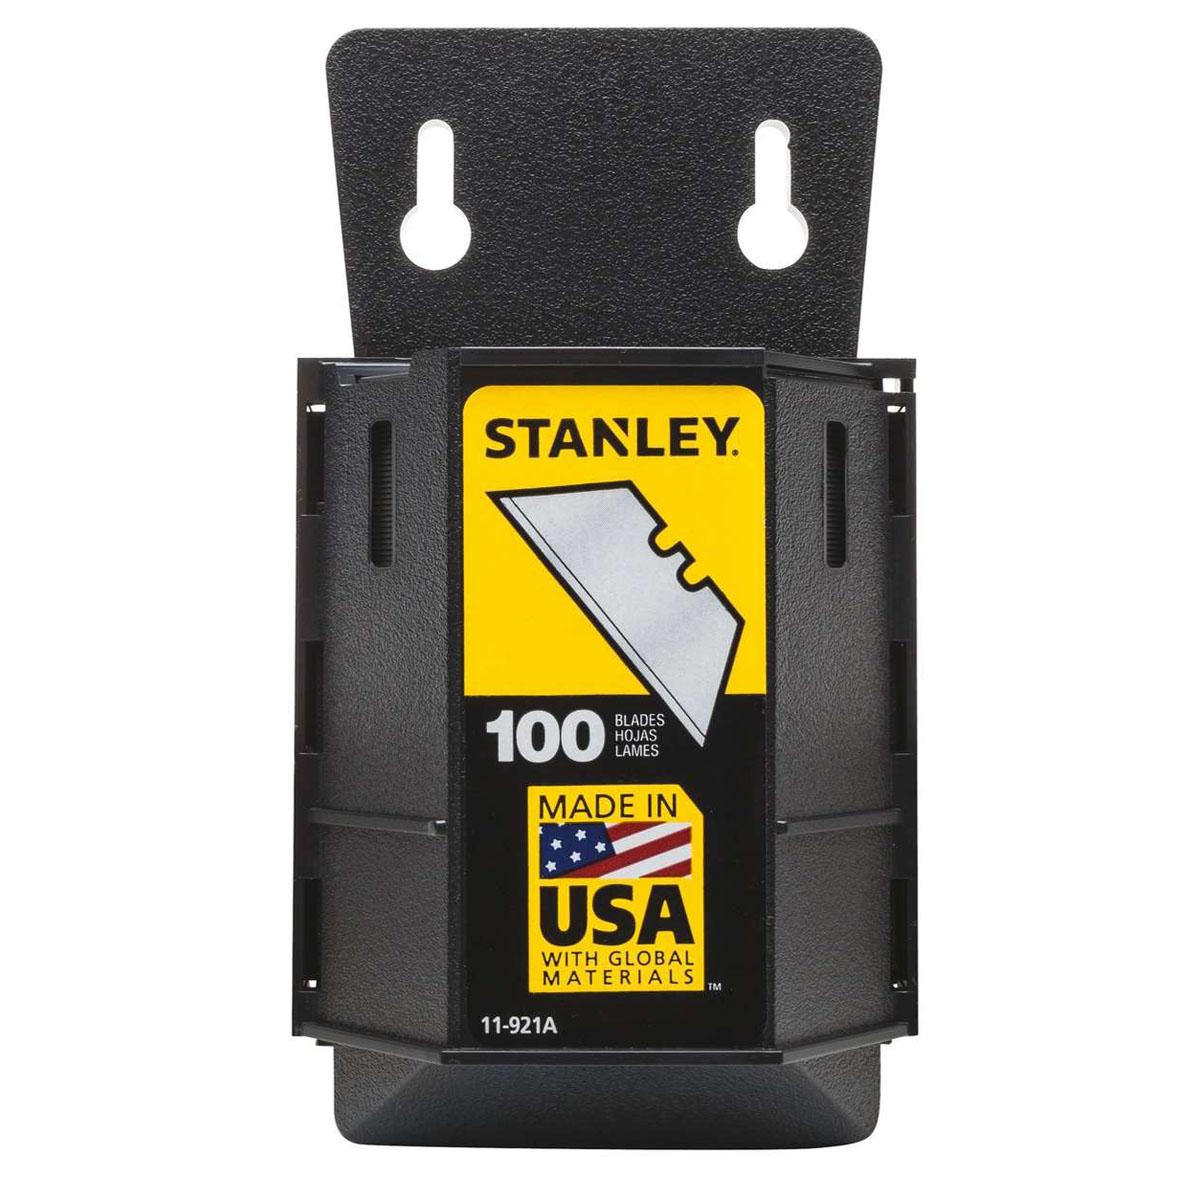 Stanley Steel Heavy Duty Blade Dispenser with 100 Blades for $4.99